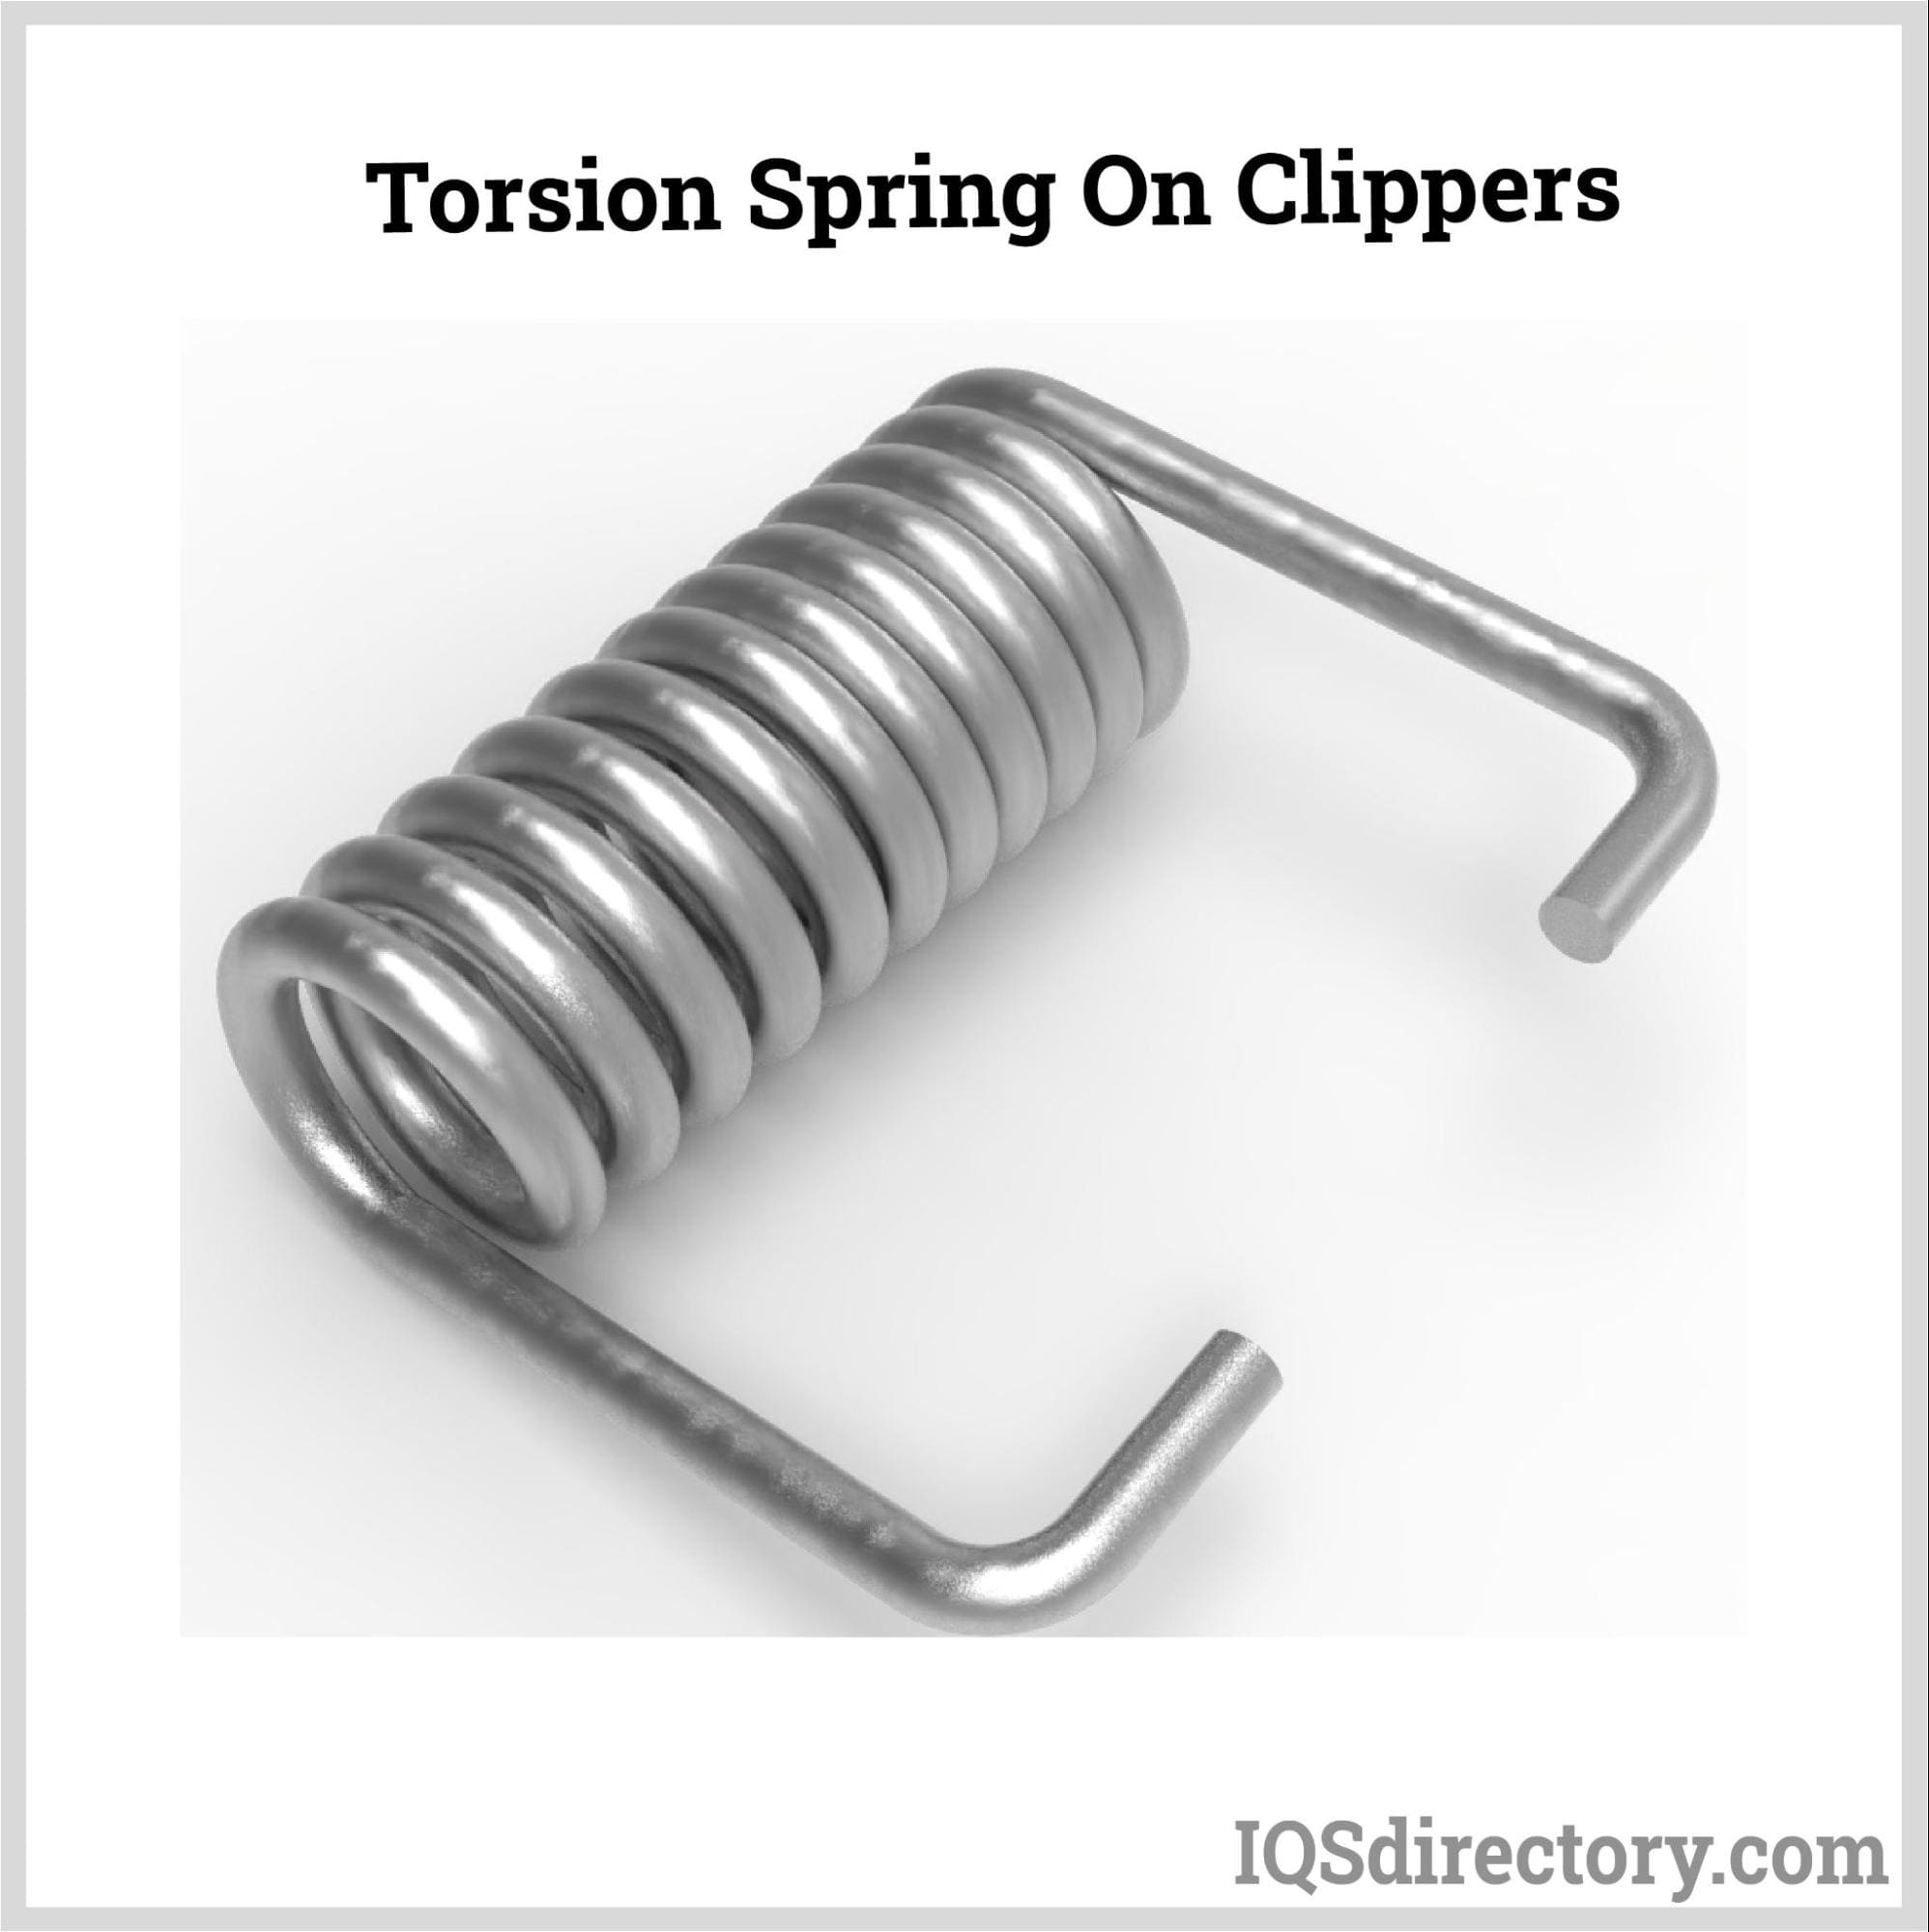 Torsion Spring On Clippers